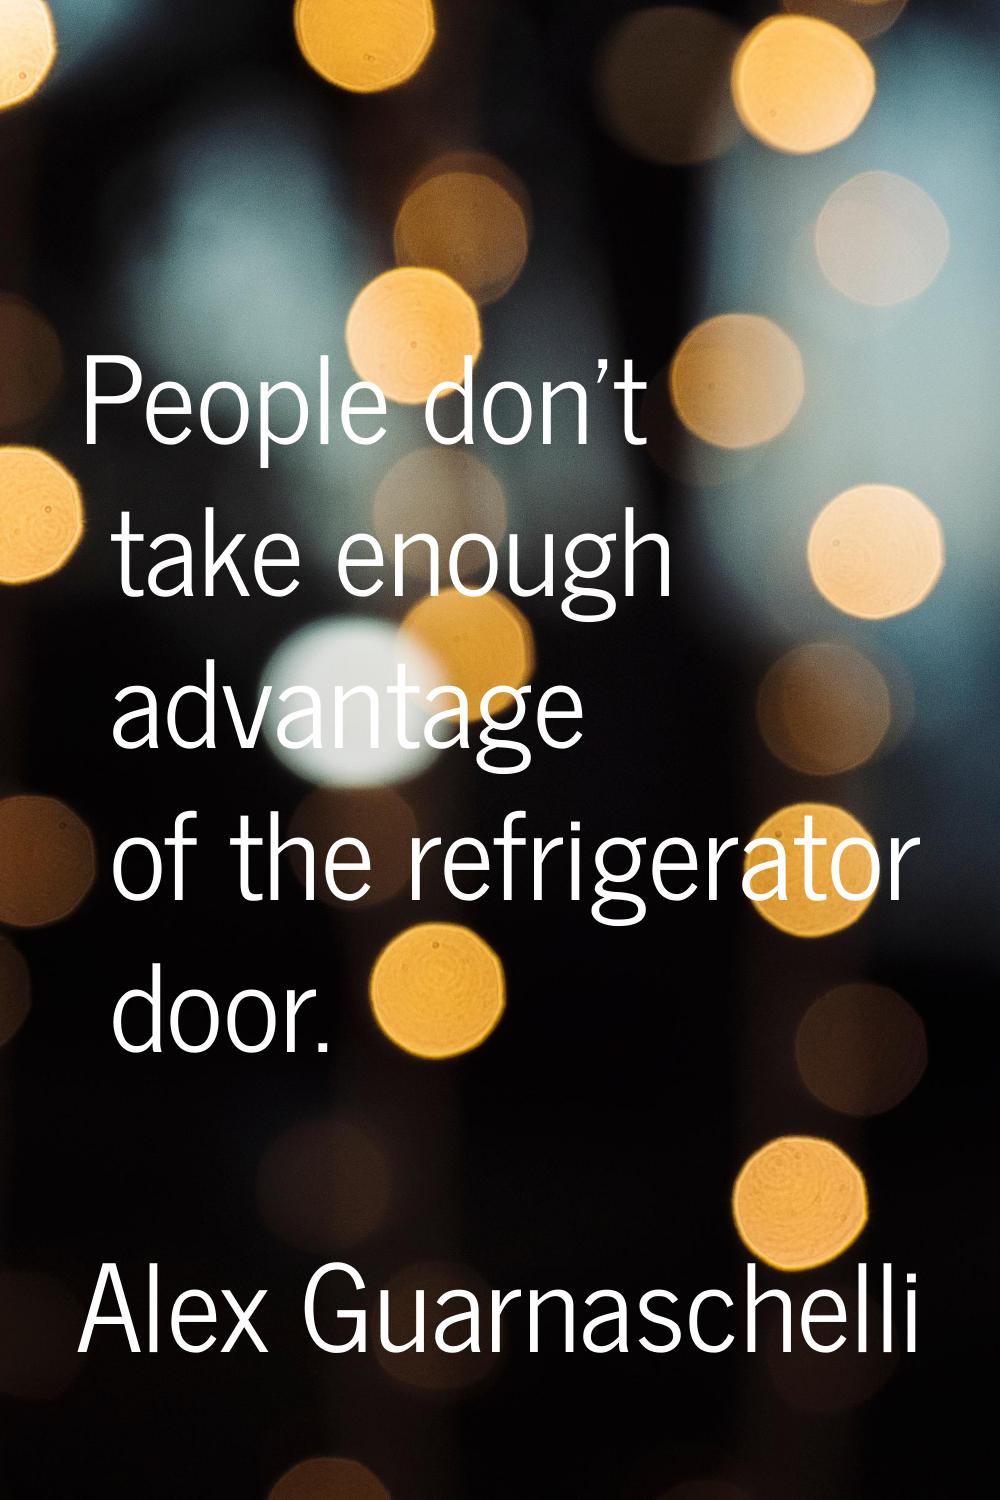 People don't take enough advantage of the refrigerator door.